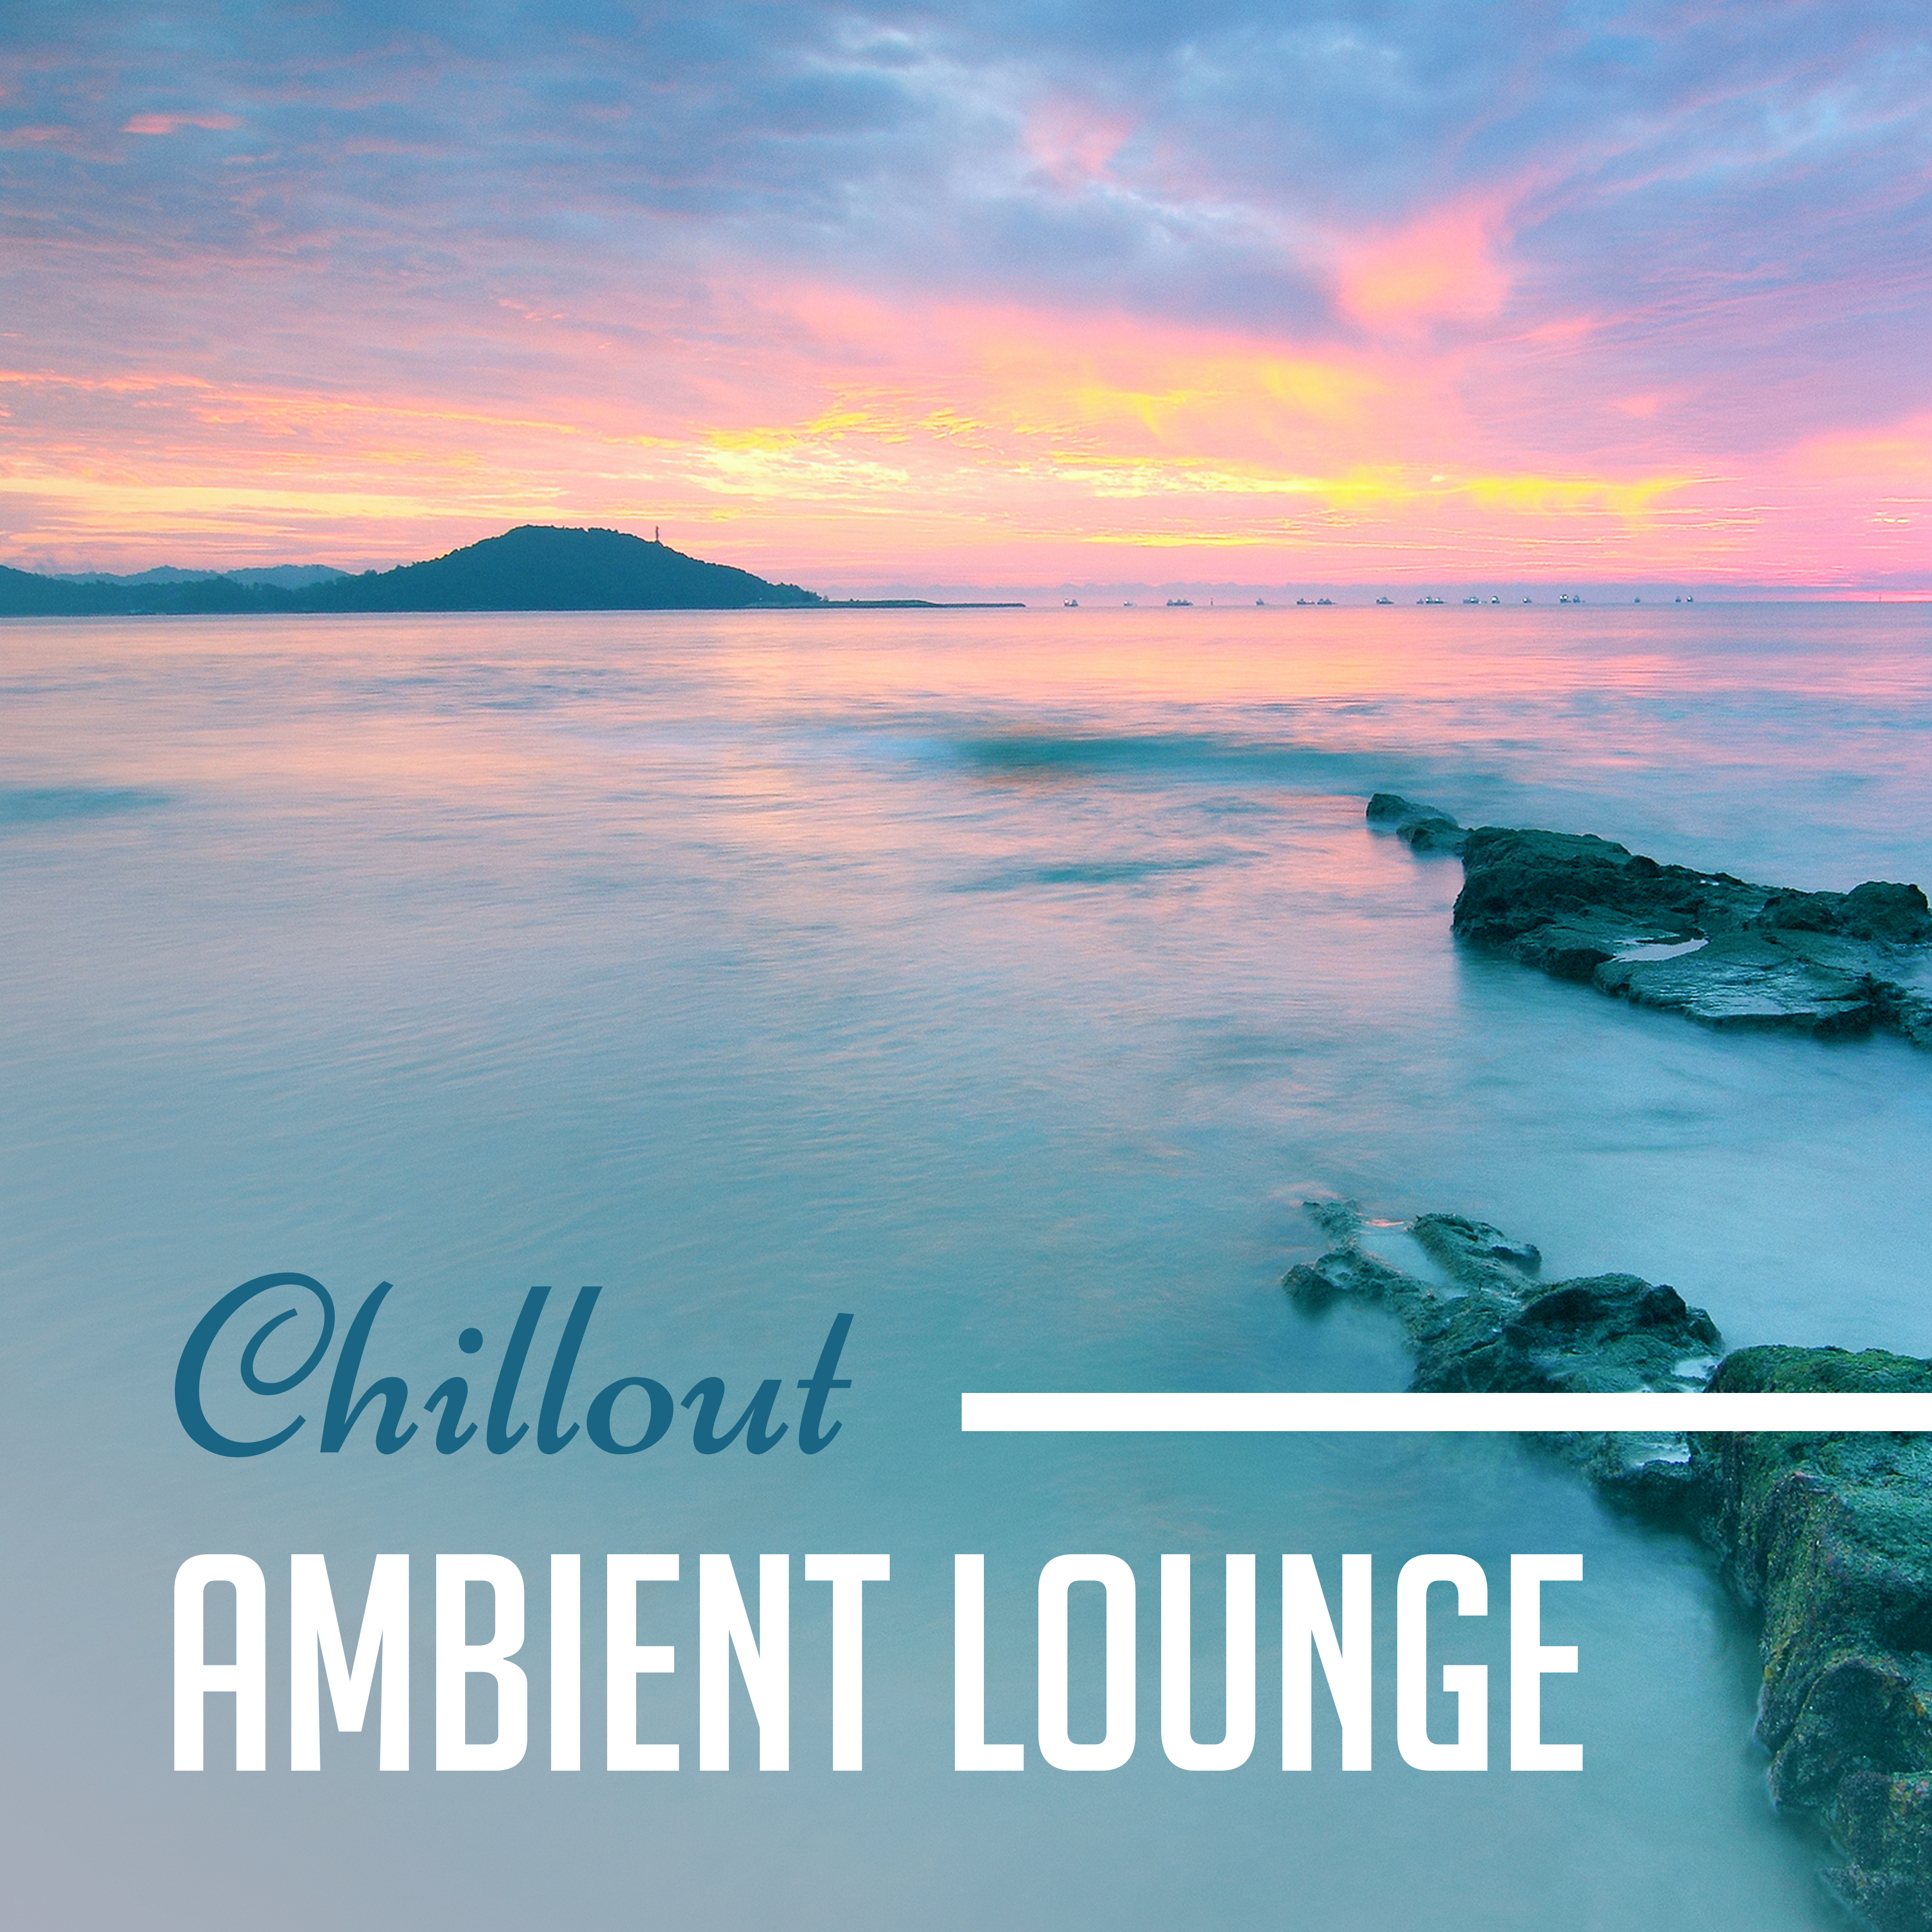 Chillout Ambient Lounge  - Electronic Music, New Chill Out Beats, Ambient Party Hits